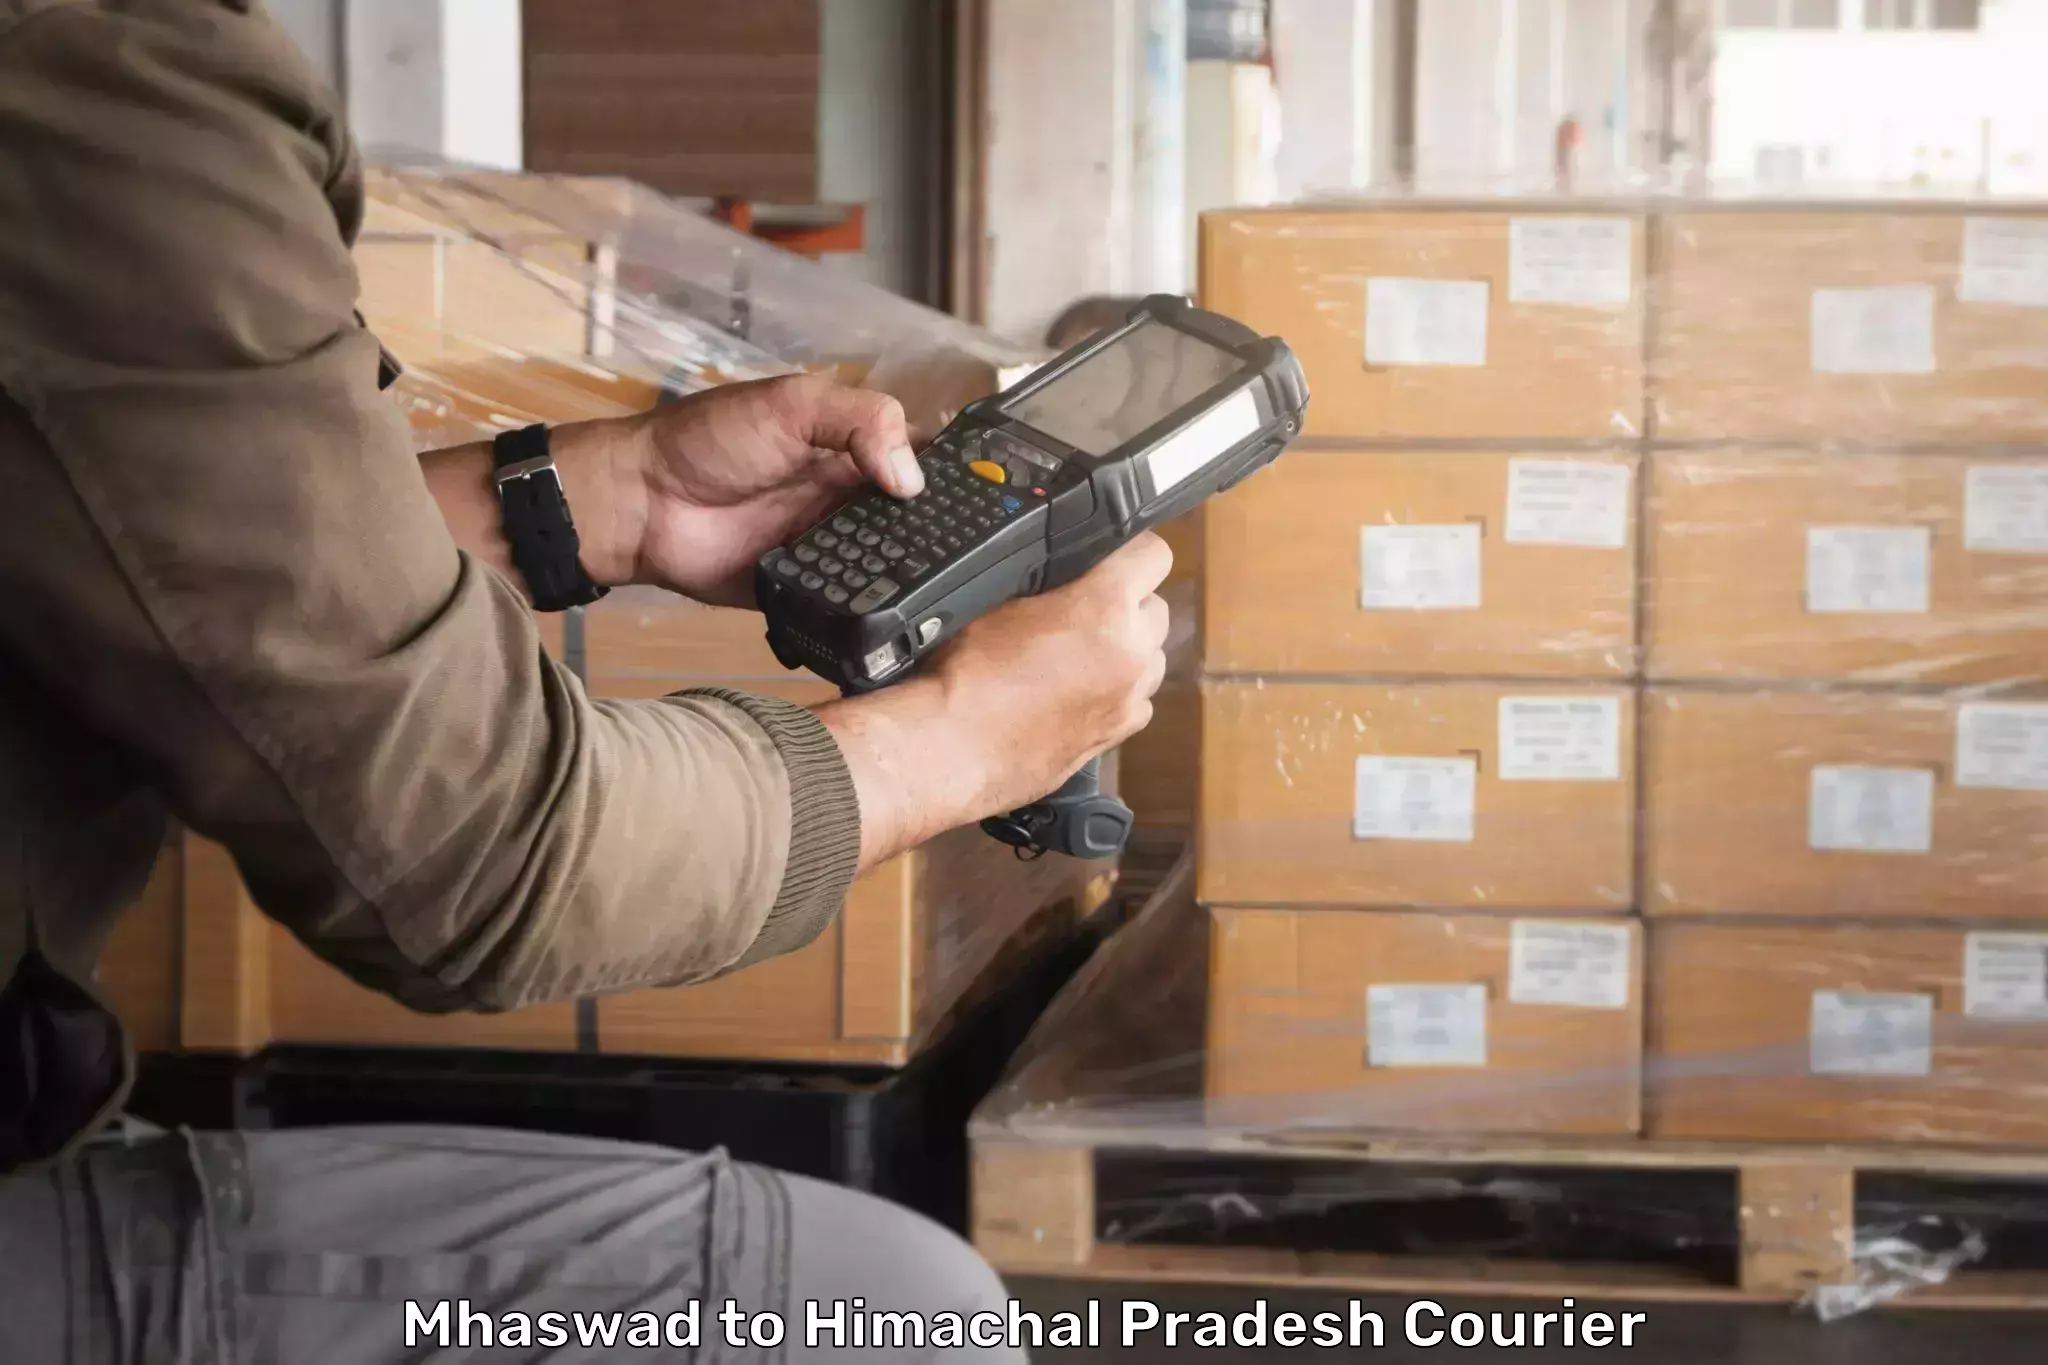 Personal parcel delivery in Mhaswad to Nalagarh